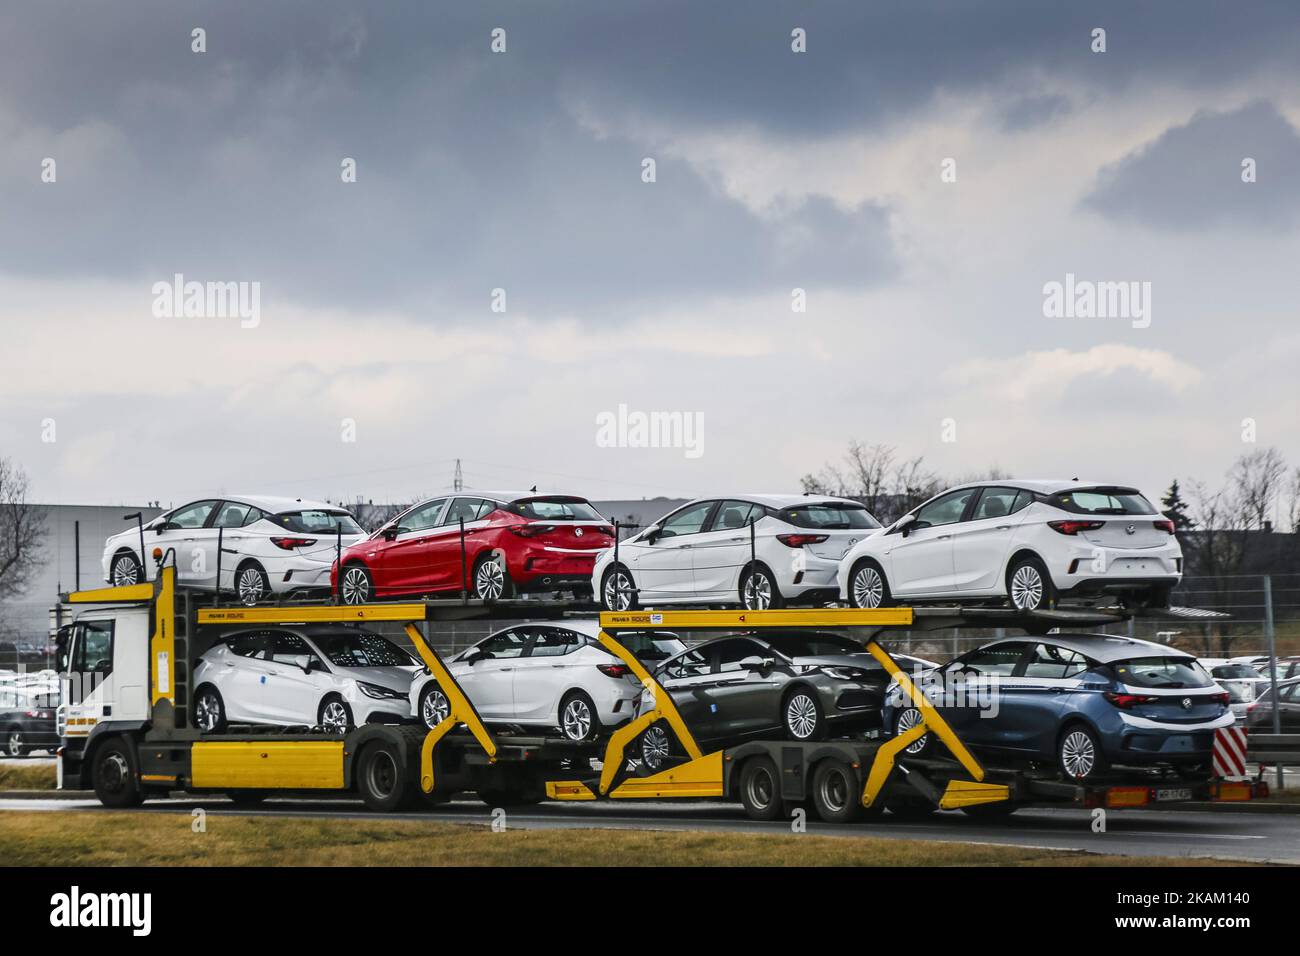 A brand new Opel Astra vehicles are transported by a car carrier trailer as they leave the Opel car factory of General Motors Manufacturing Poland in Gliwice, Poland, on March 7, 2017. General Motors is selling its loss-making European car business, including Germany's Opel and British brand Vauxhall, to France's PSA group. (Photo by Beata Zawrzel/NurPhoto) *** Please Use Credit from Credit Field *** Stock Photo